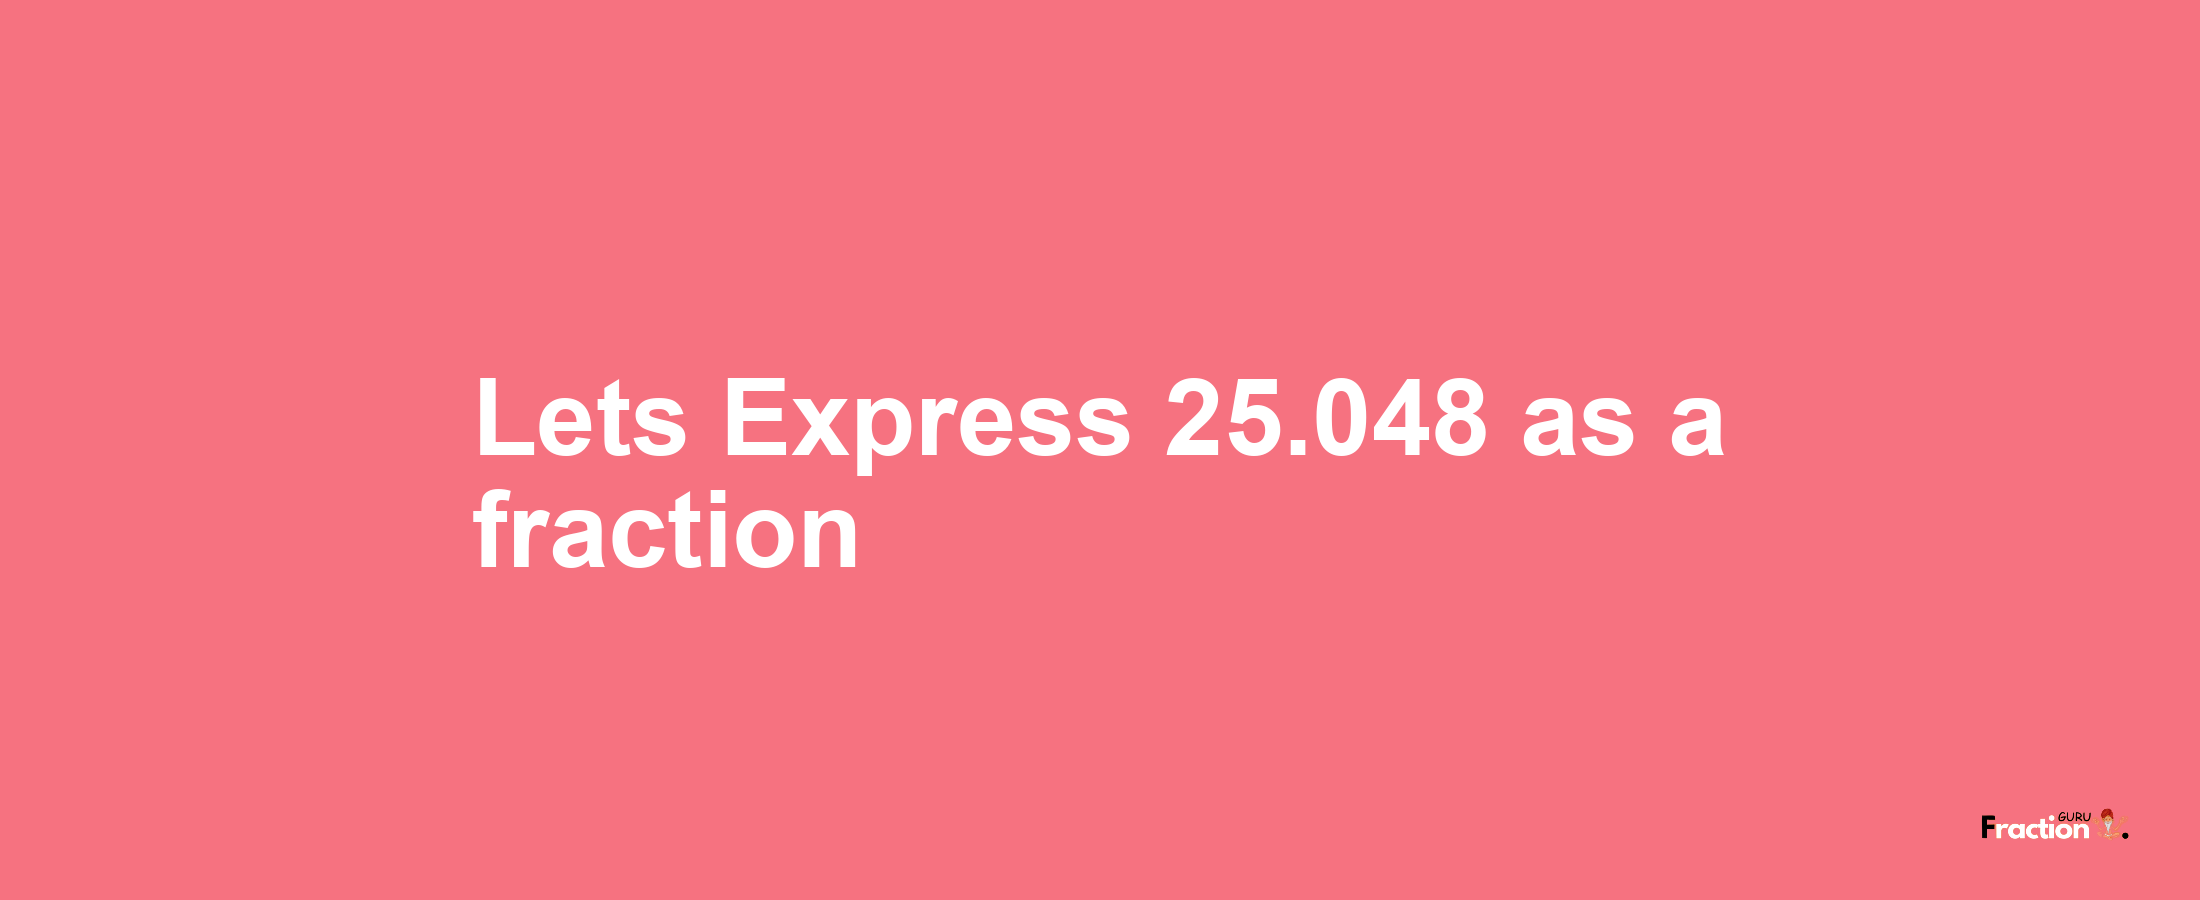 Lets Express 25.048 as afraction